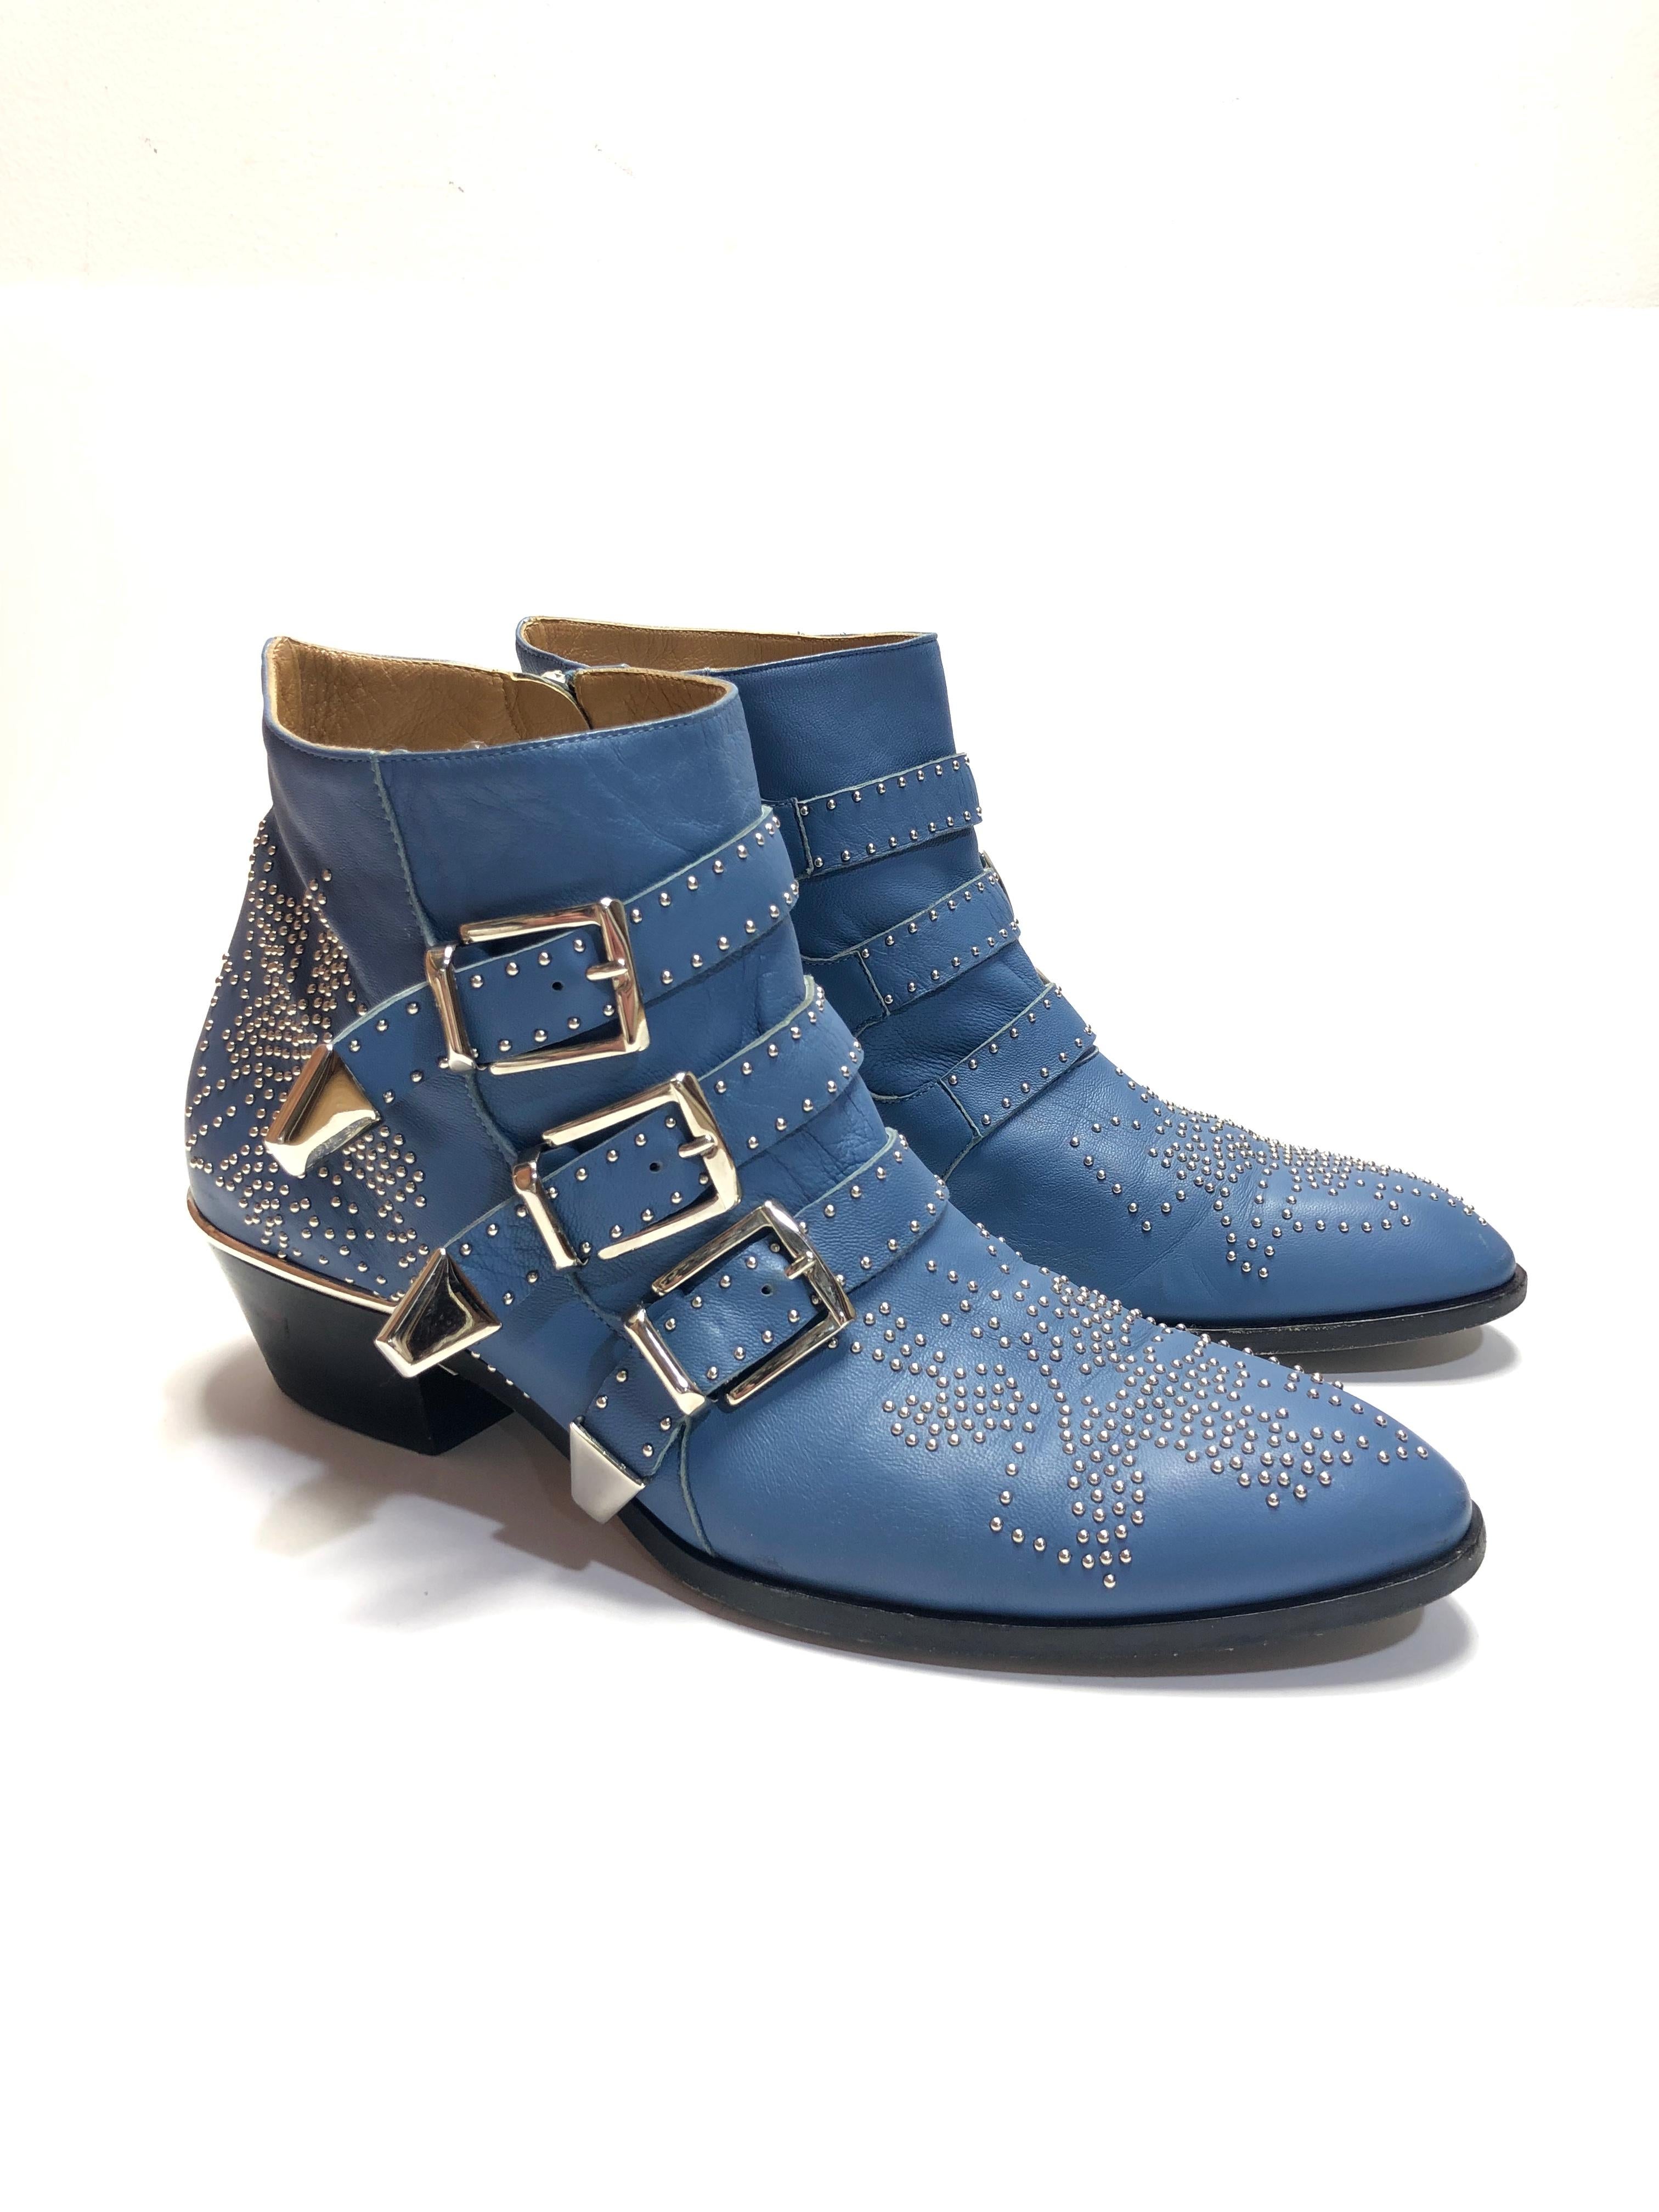 Chloe Cosmic Blue Ankle Length Boots w/ Silver Buckle & Studded Detail
39.5